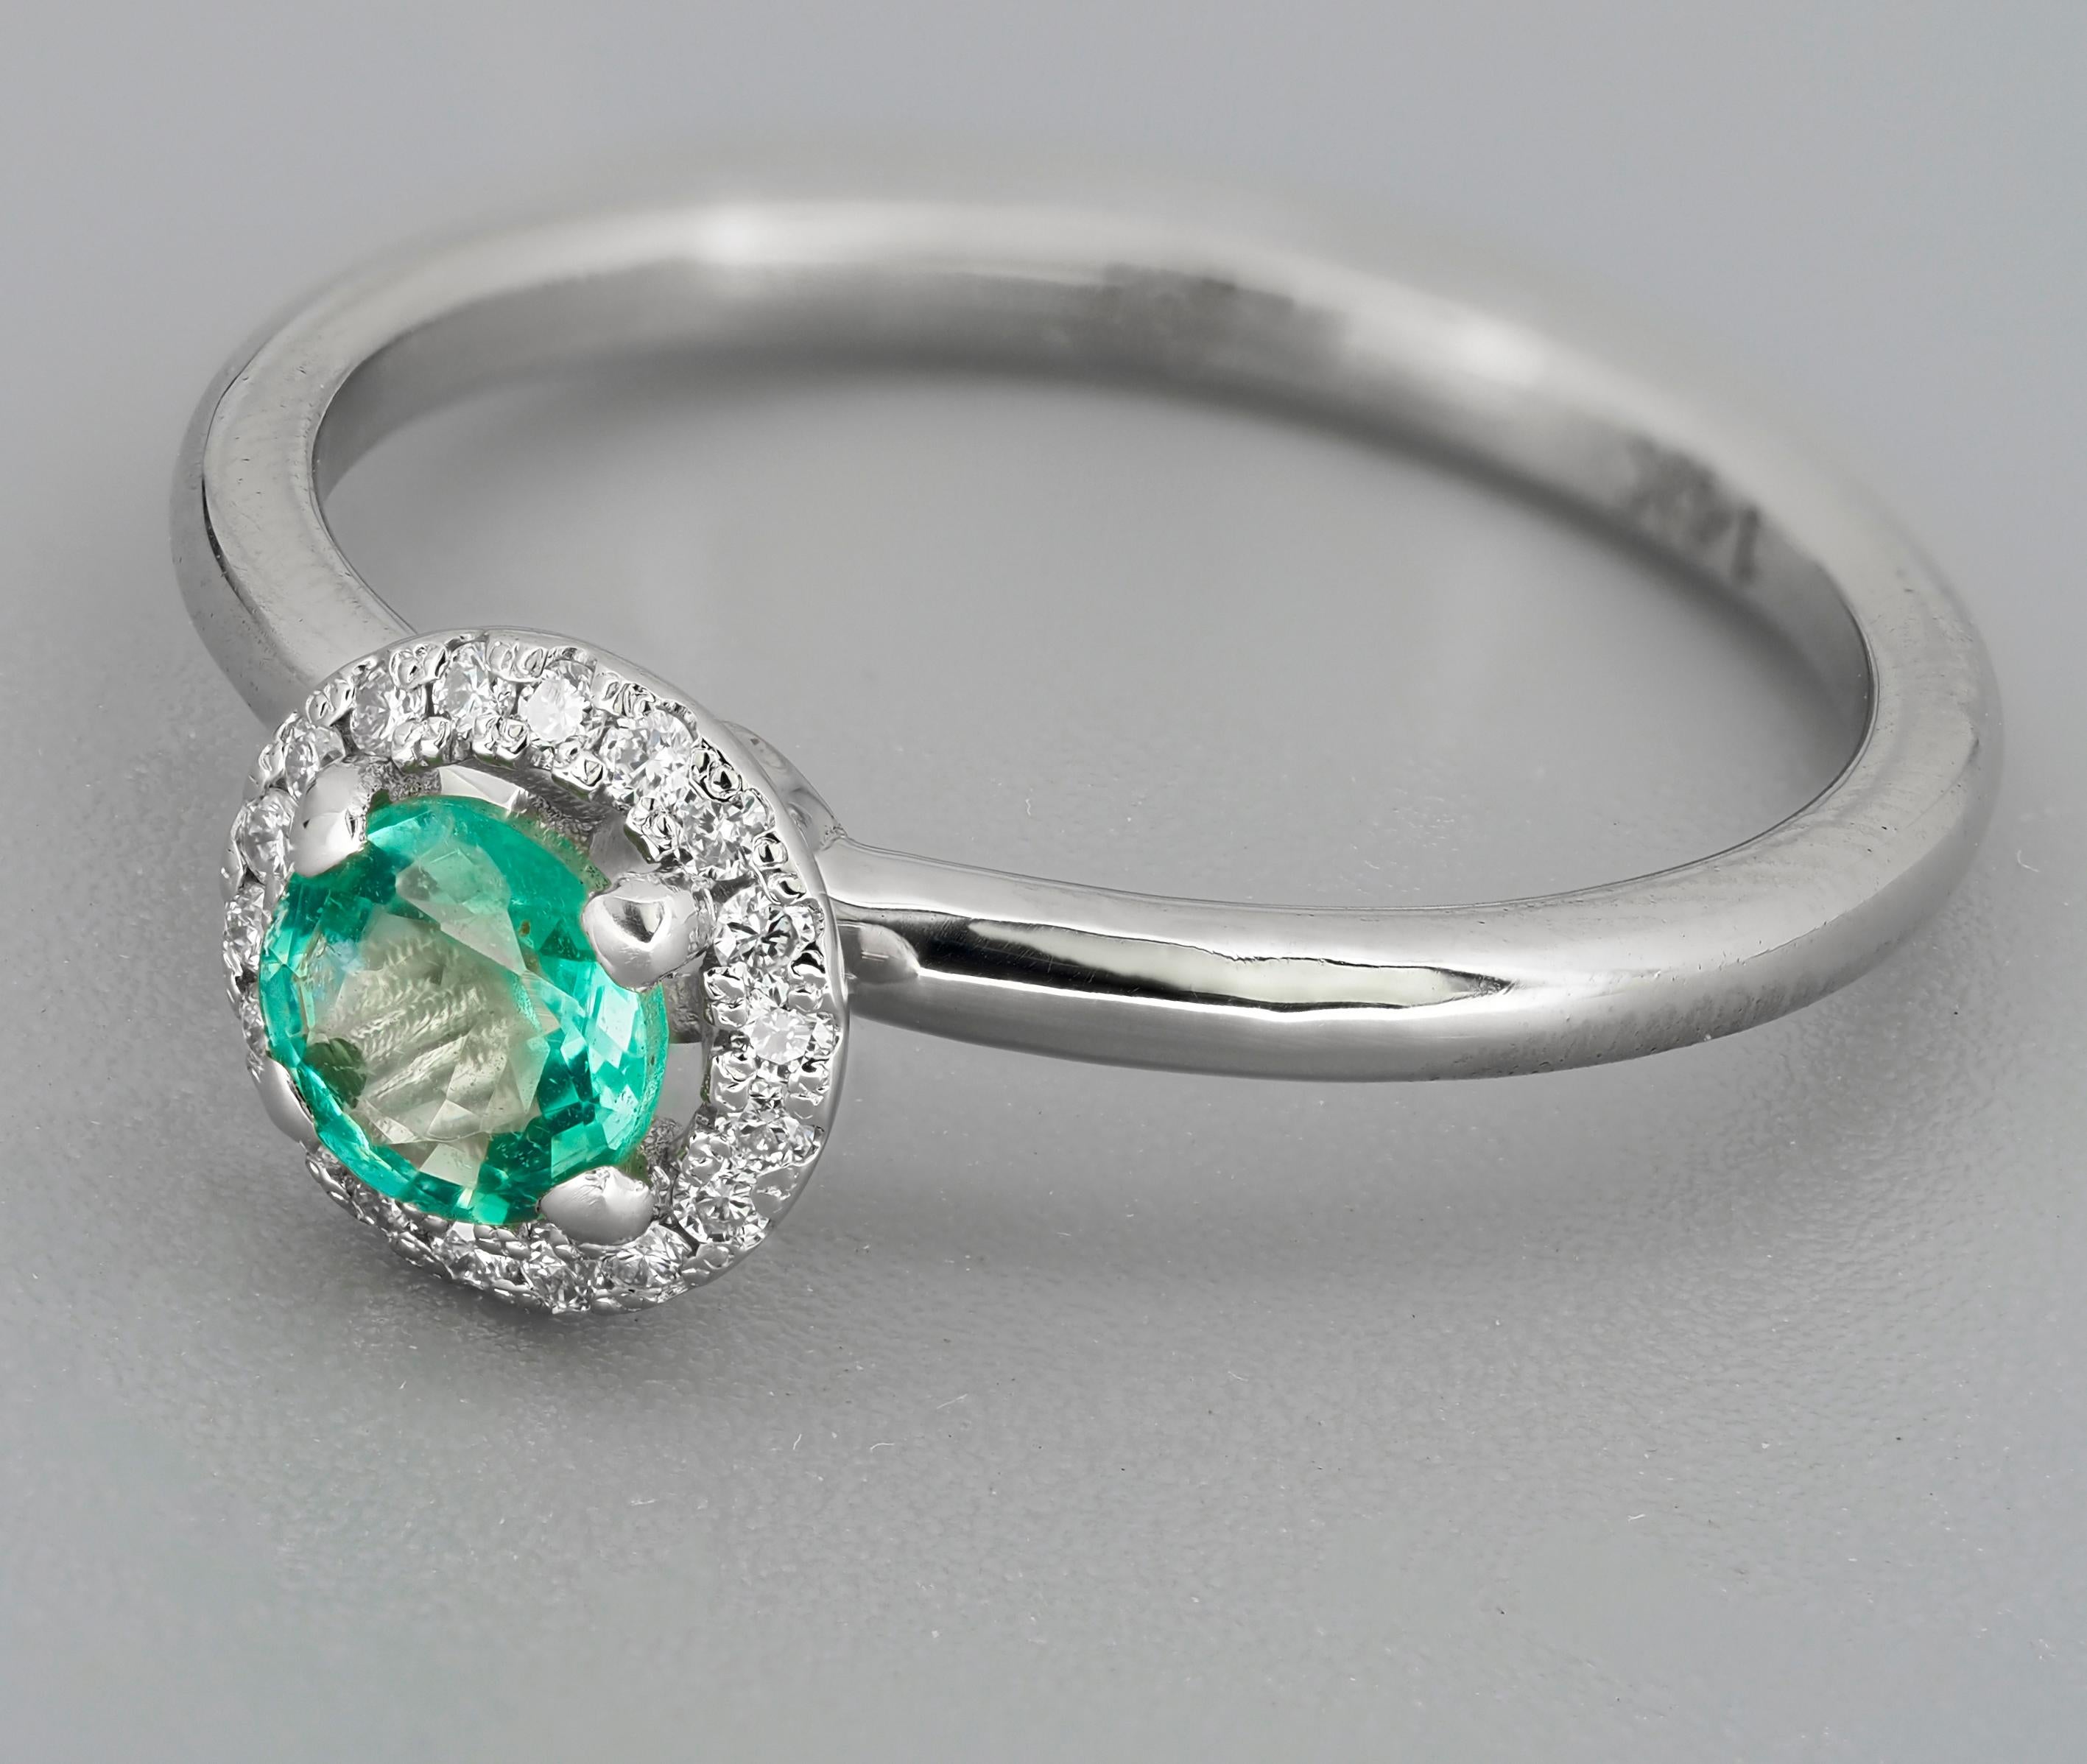 Women's 14k Gold Ring with Emerald and Diamonds, Emerald Halo Ring